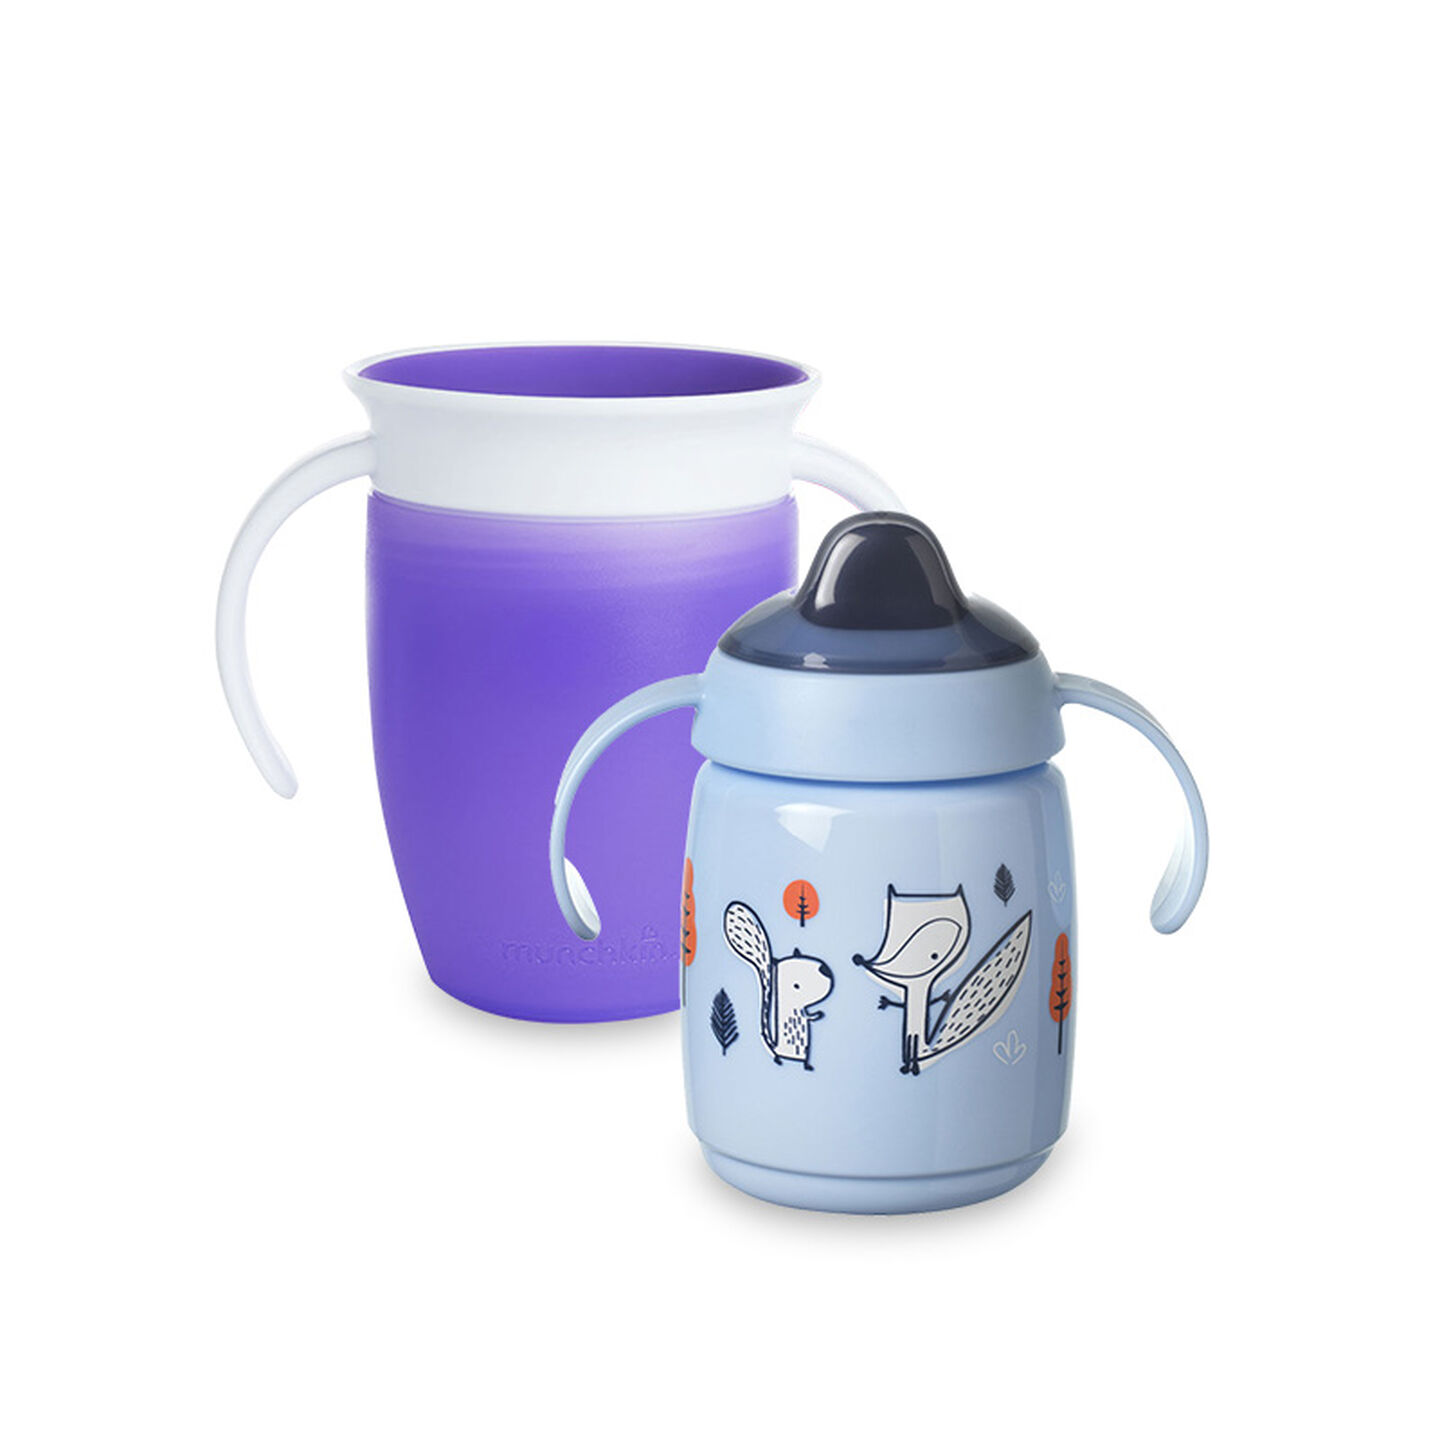 Sippy Cups/toddler feeding